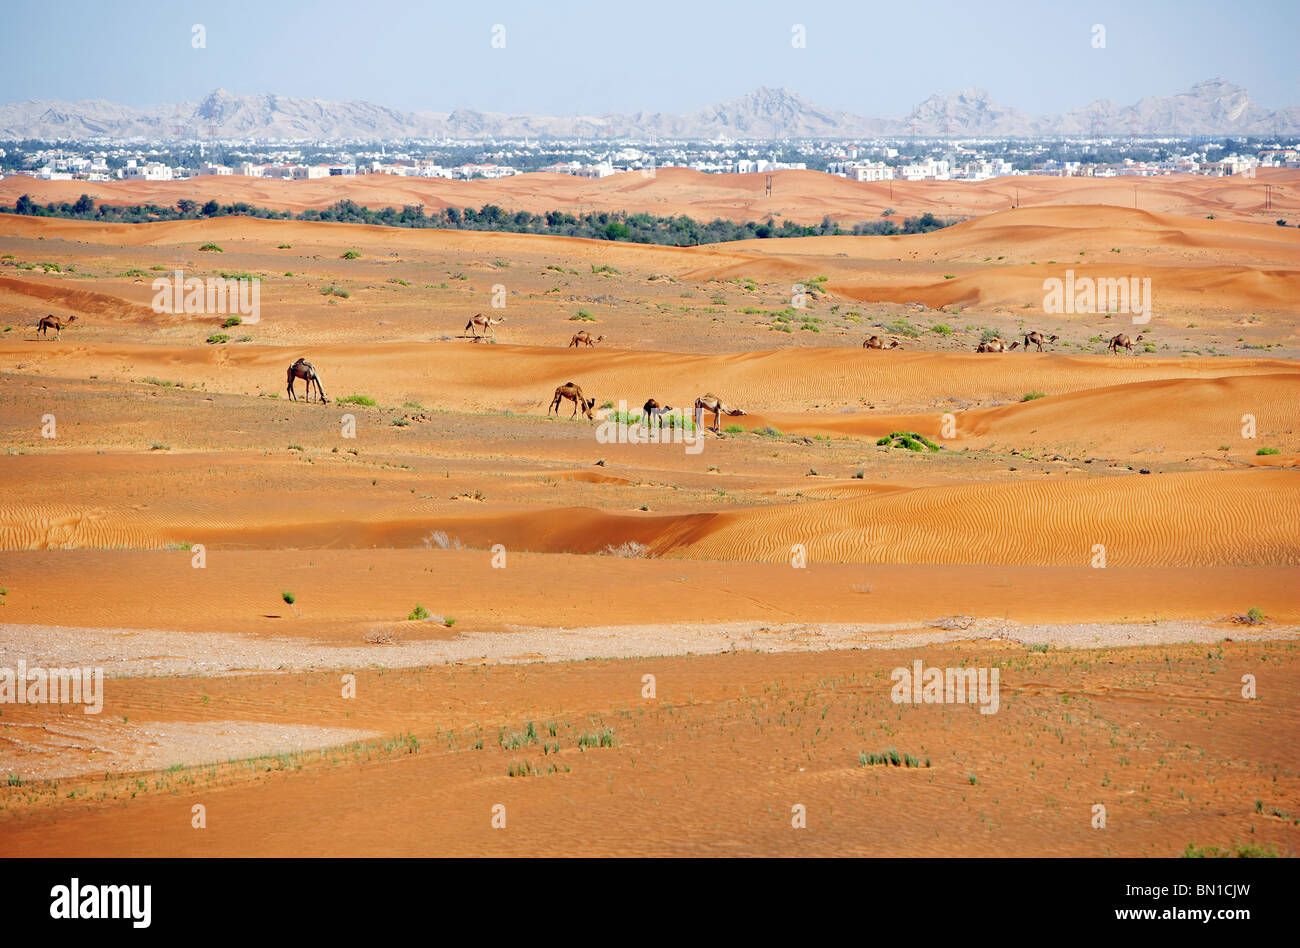 Camels grazing in deserts outskirts of Al-Ain, Abu Dhabi, UAE, Middle East Stock Photo